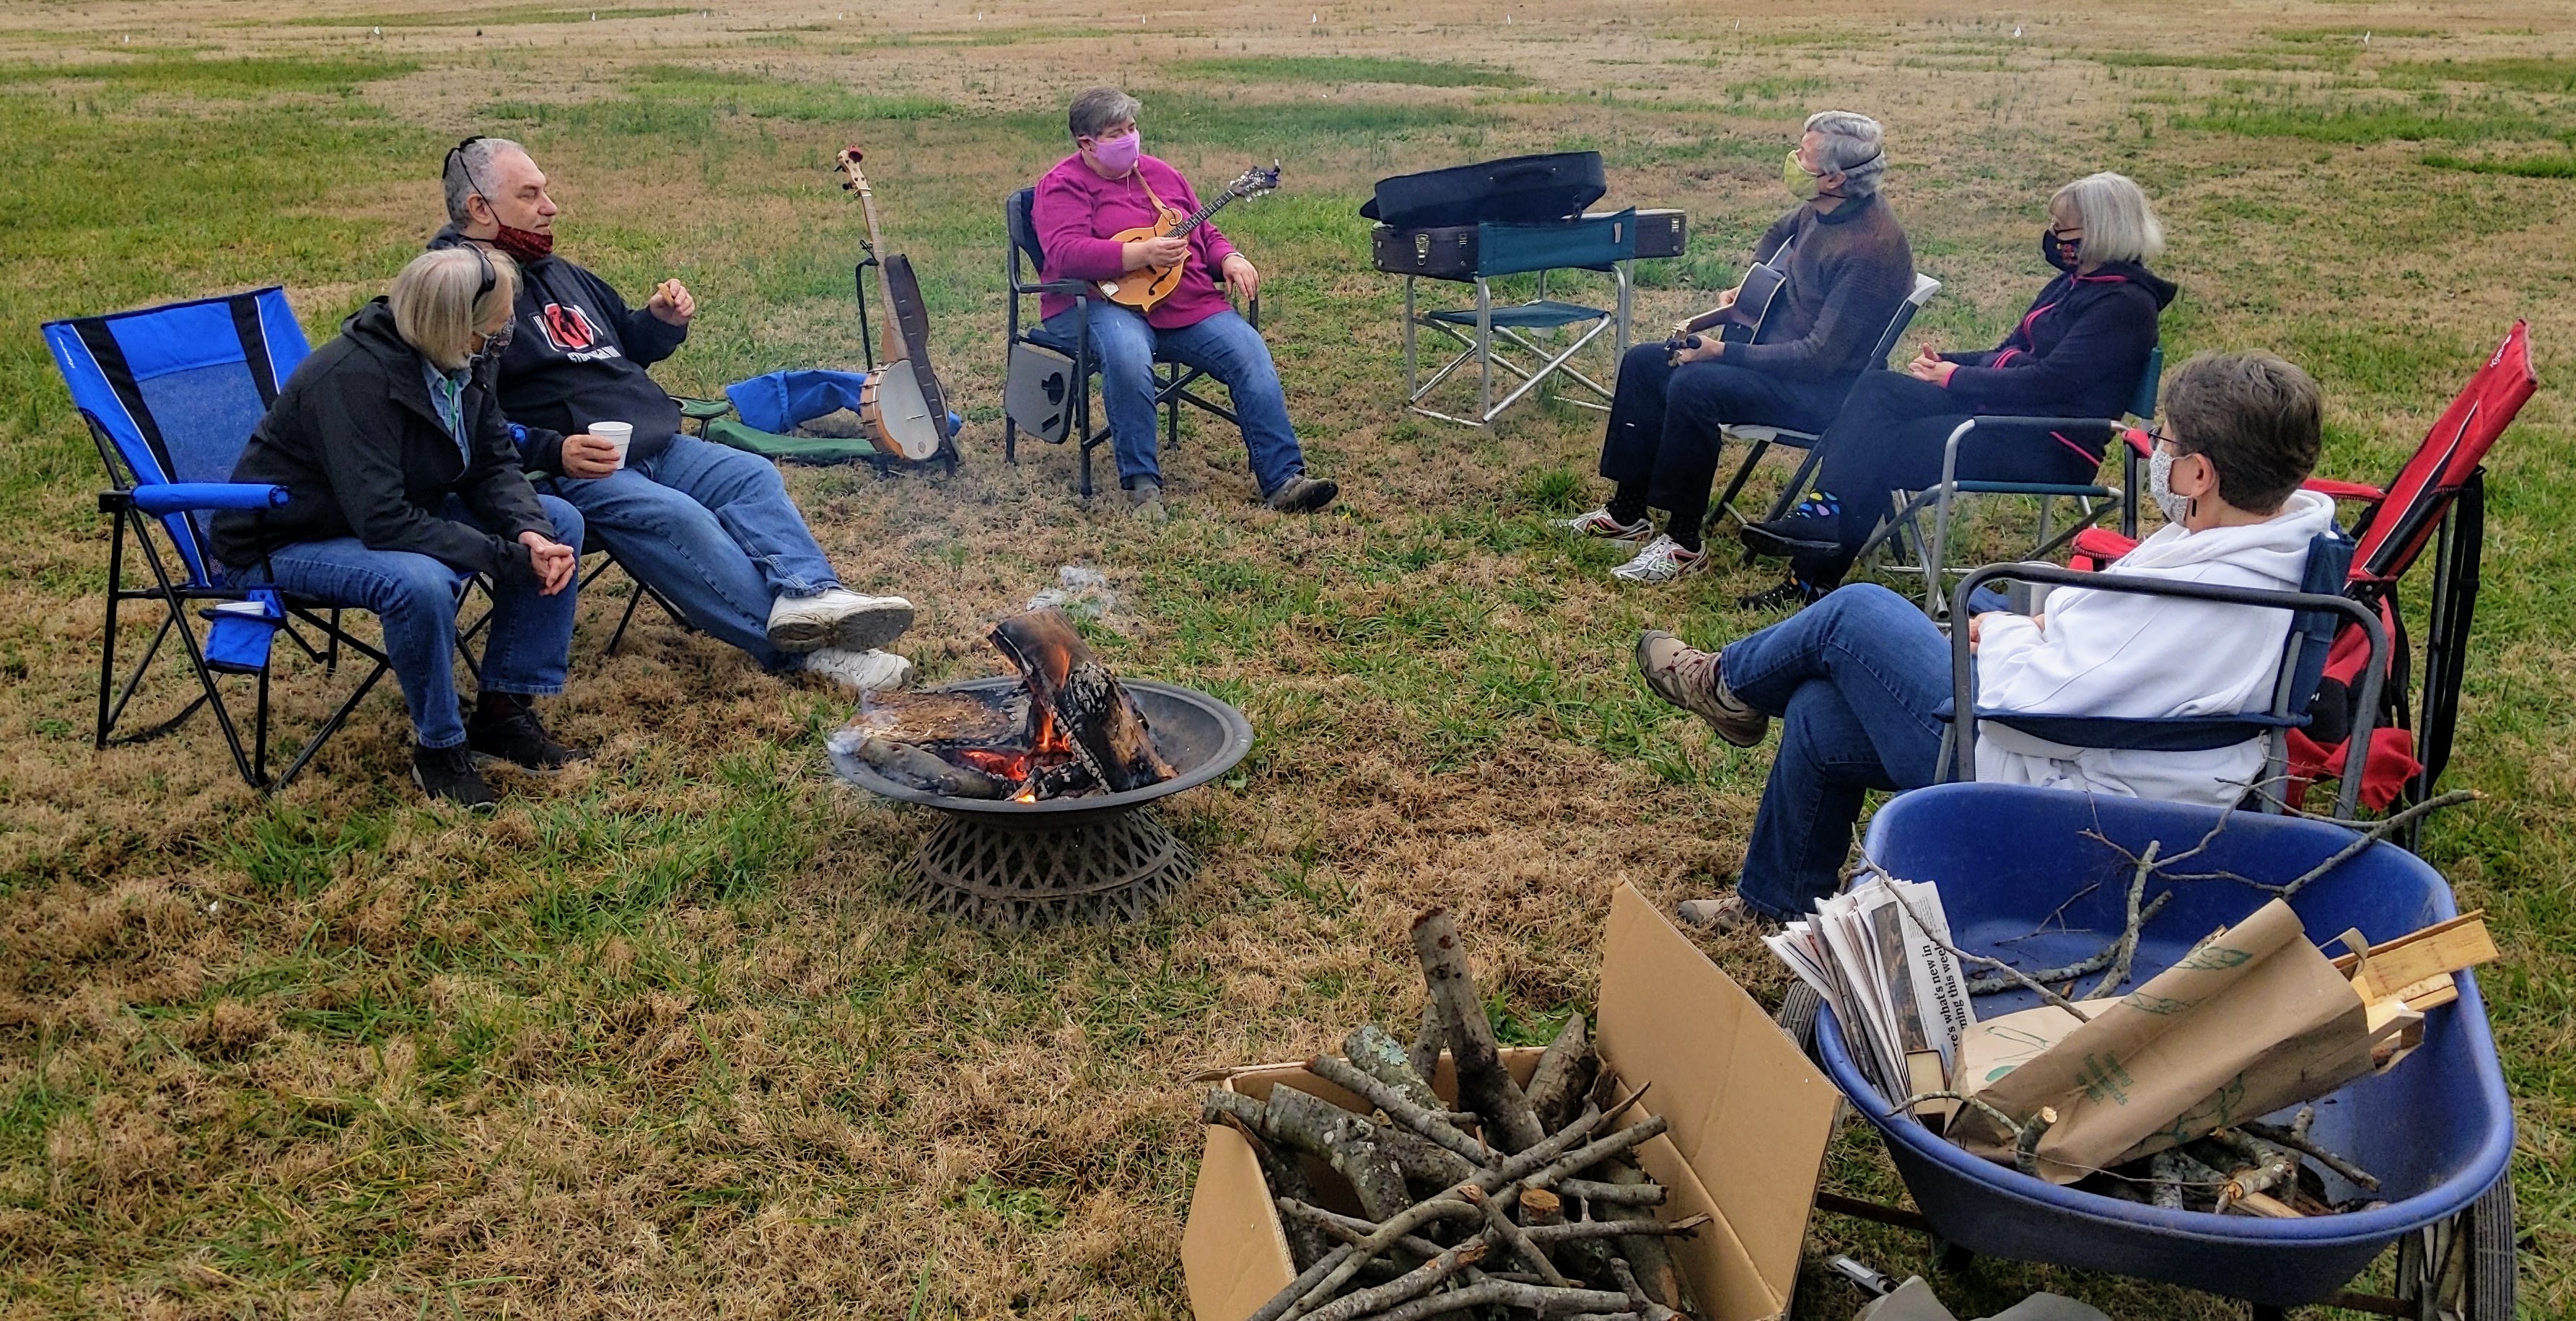 Group sitting around a fire pit in lawn chairs, some with musical instruments on their laps.